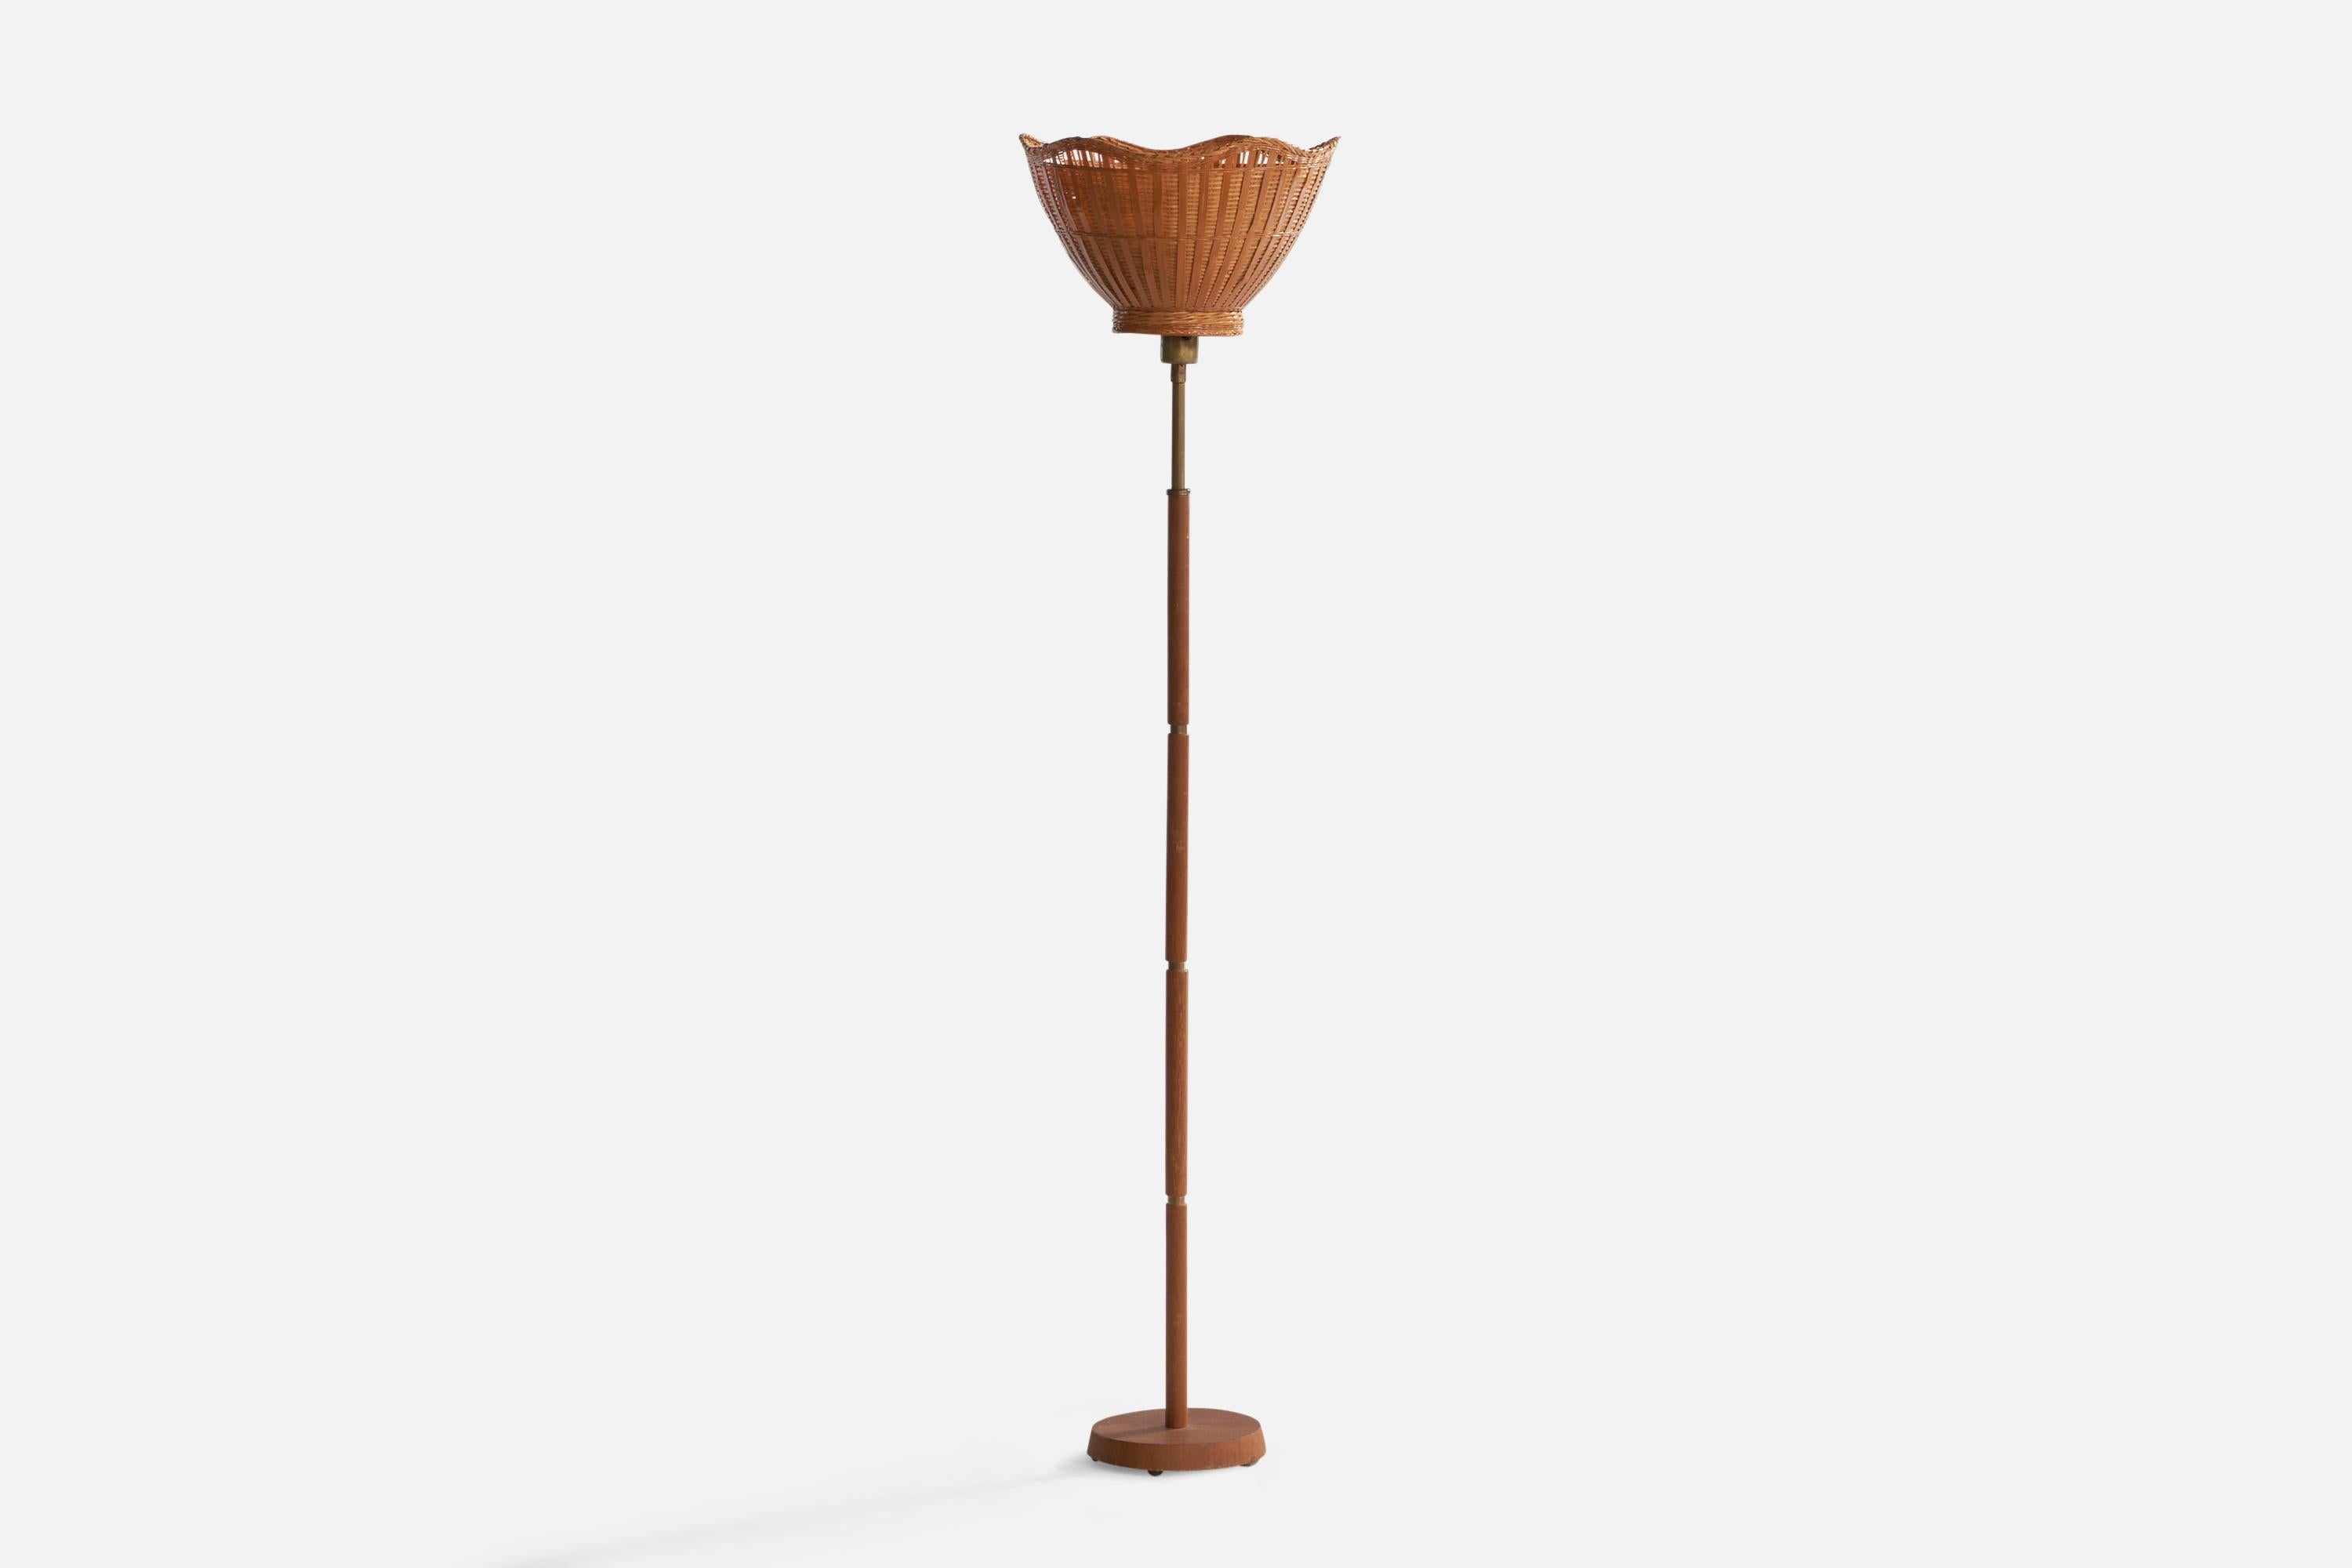 A brass, teak and rattan floor lamp designed and produced in Sweden, 1950s.

Overall Dimensions (inches): 57.25” H x 13.6” Diameter. Stated dimensions include shade. 
Bulb Specifications: E-26 Bulb
Number of Sockets: 1
All lighting will be converted